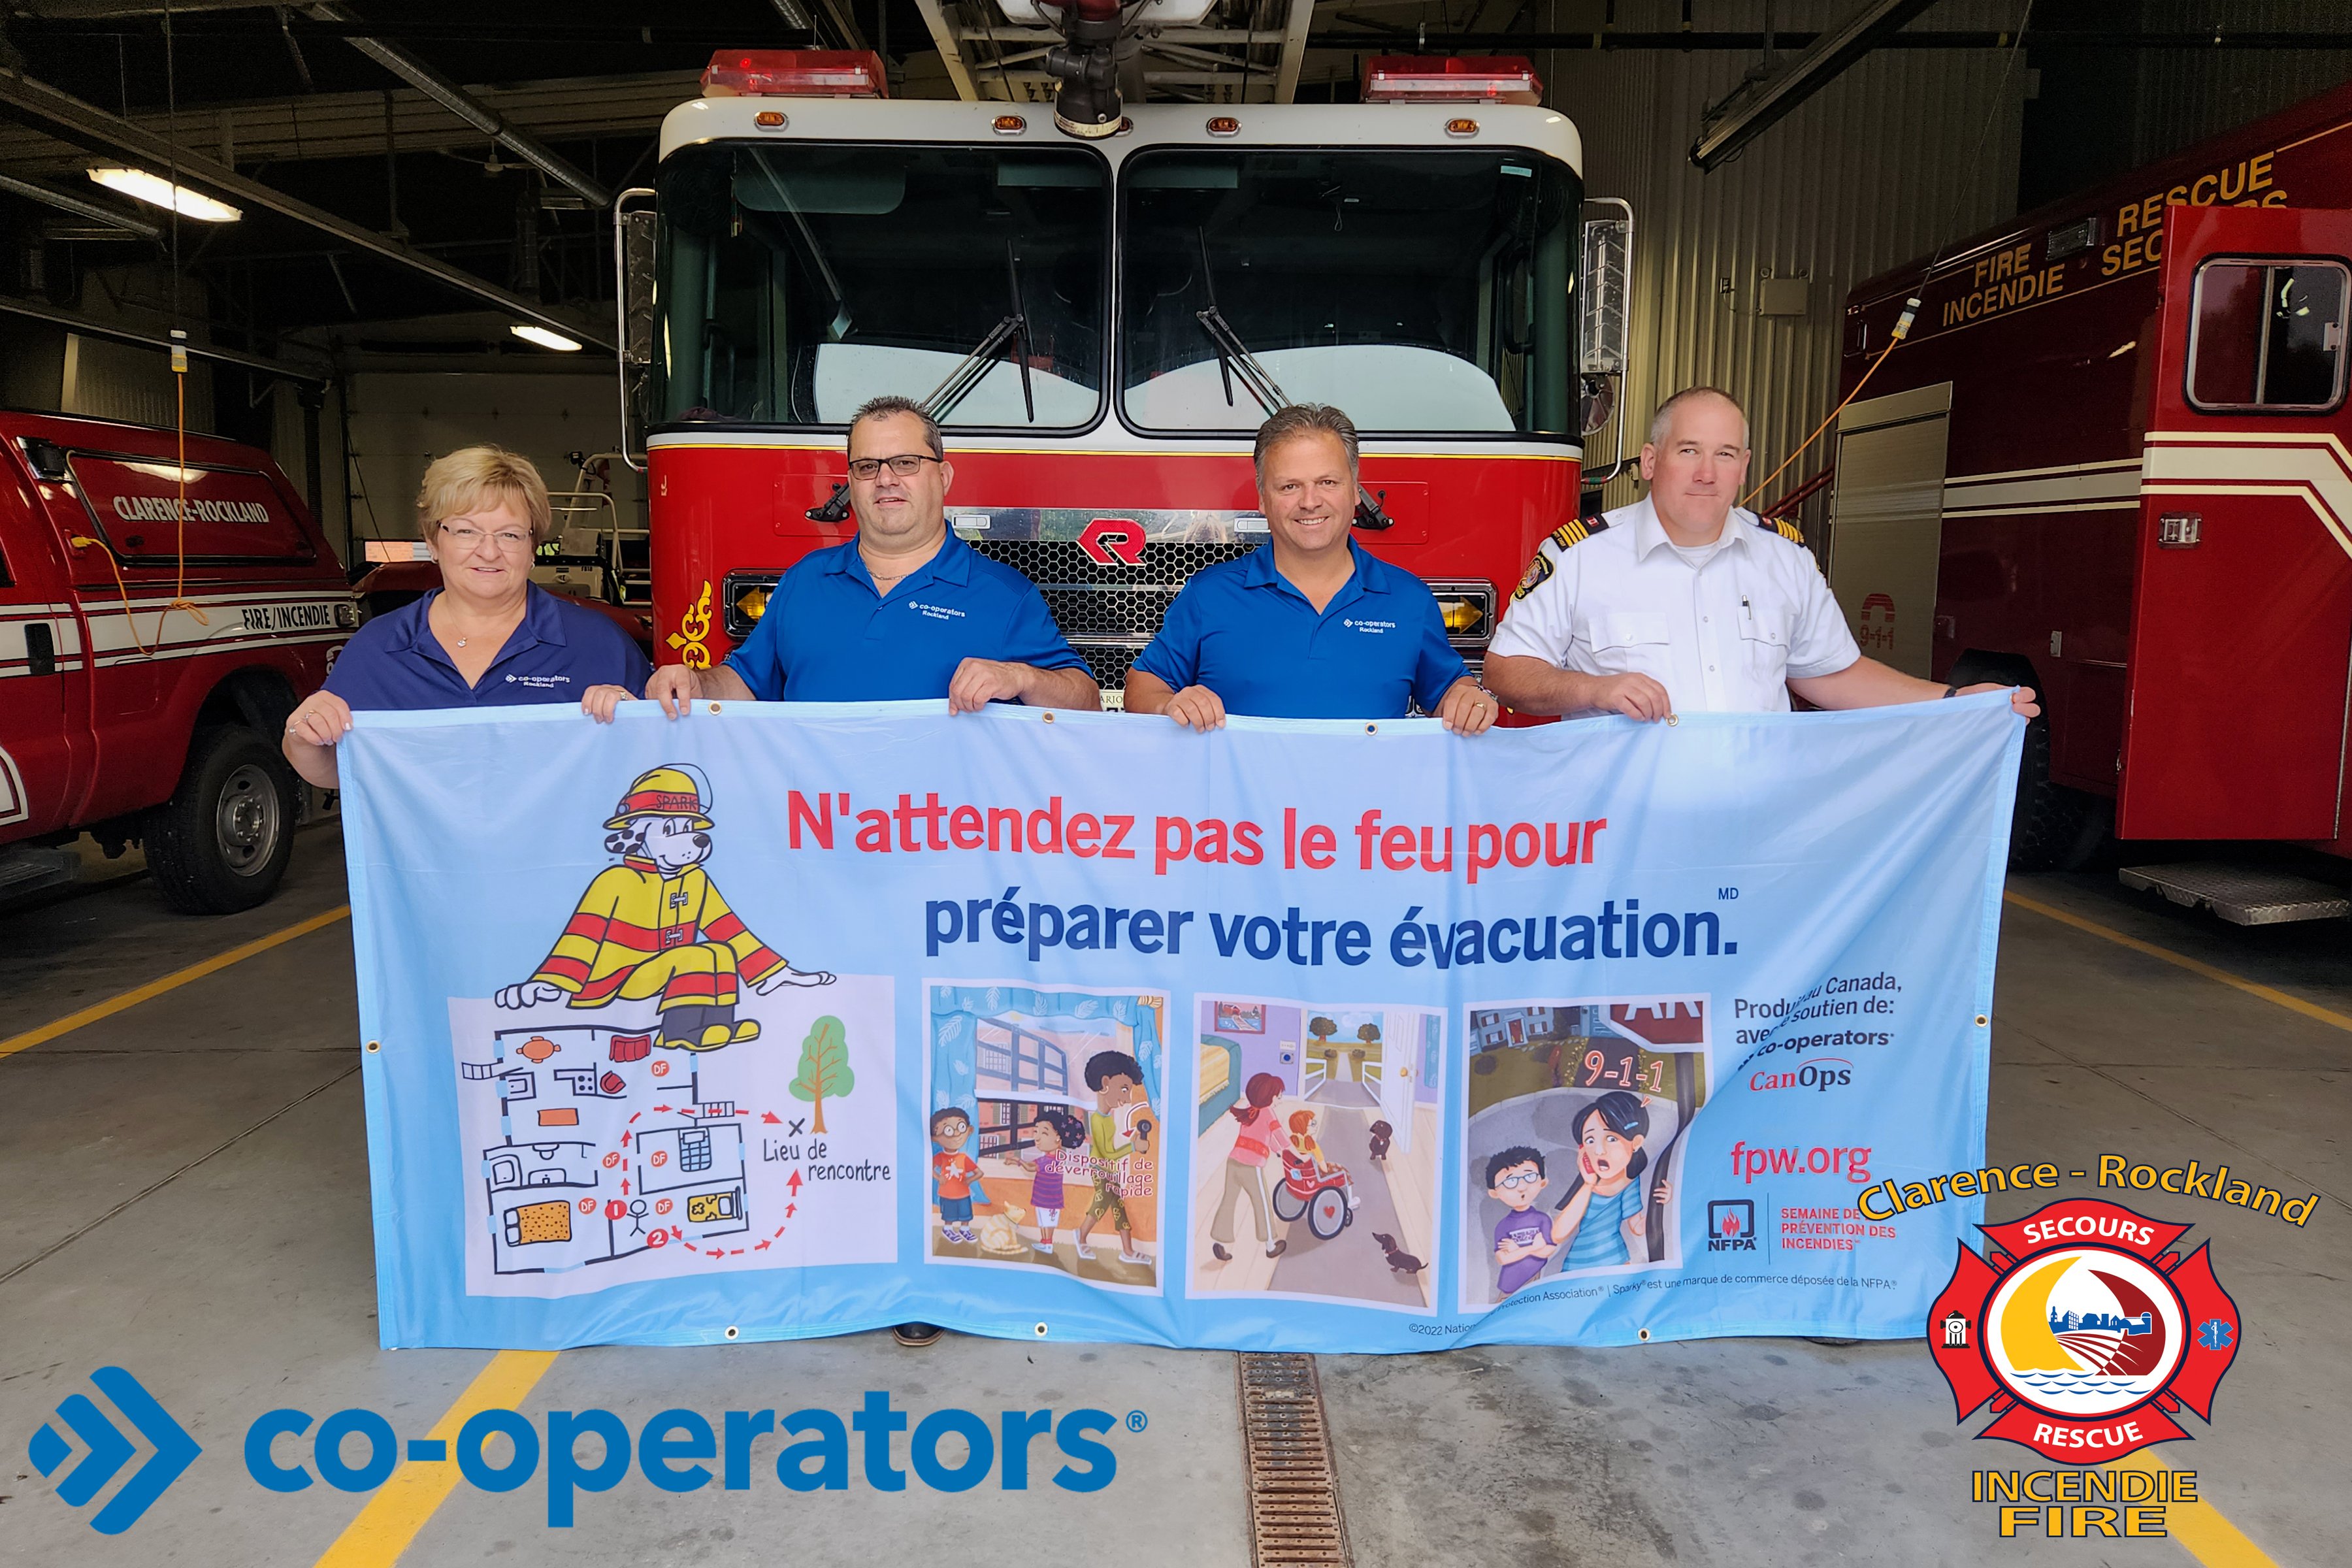 Rachelle Lodge, François Faucon, Daniel Lebrun and Martin Saumure hold a Fire Prevention Week flag in front of a fire truck